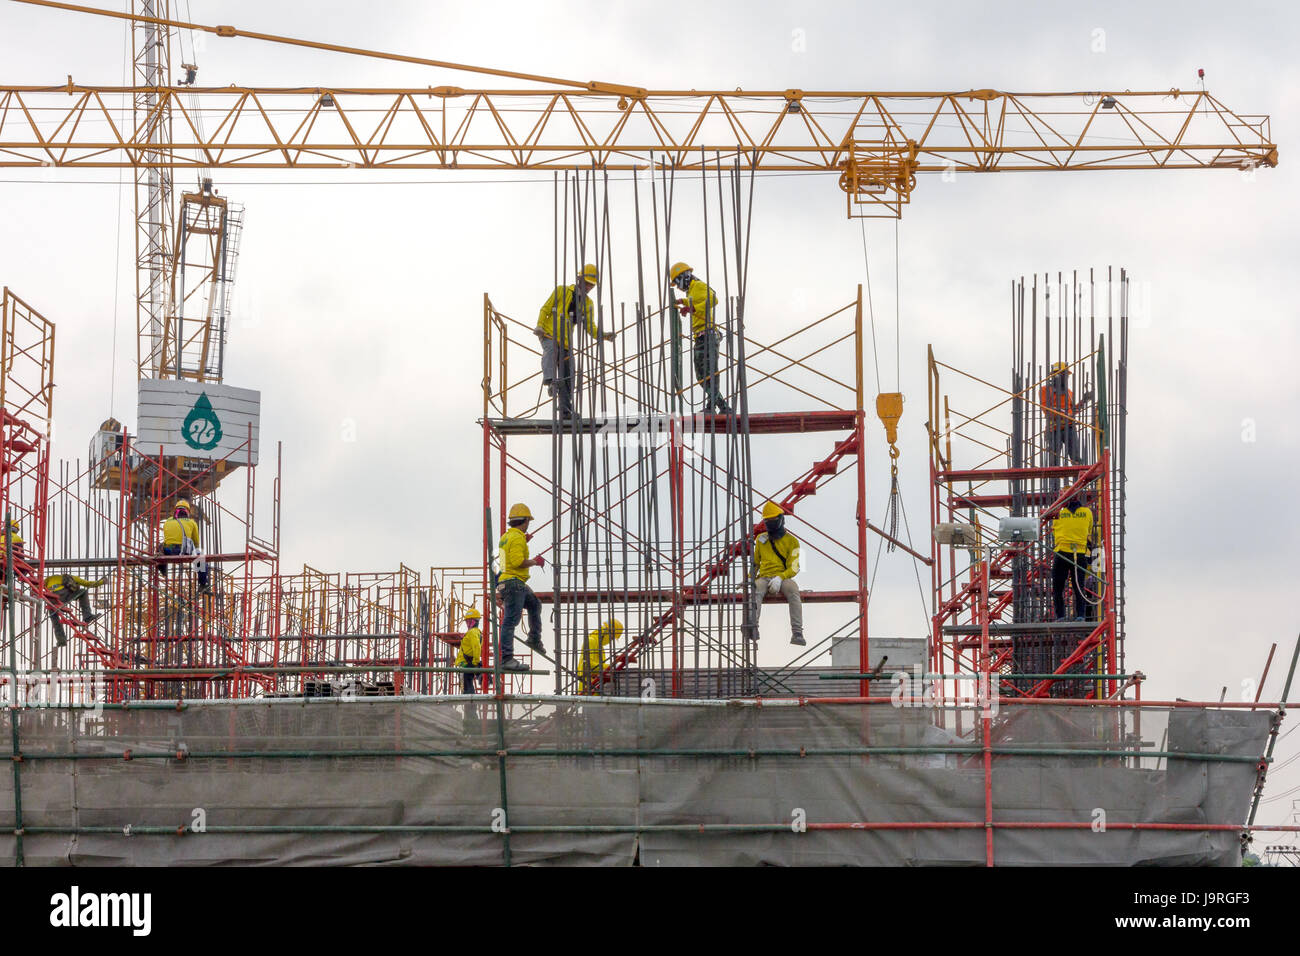 Workers fixing concrete reinforcement rods on a construction site in Bangkok, Thailand Stock Photo